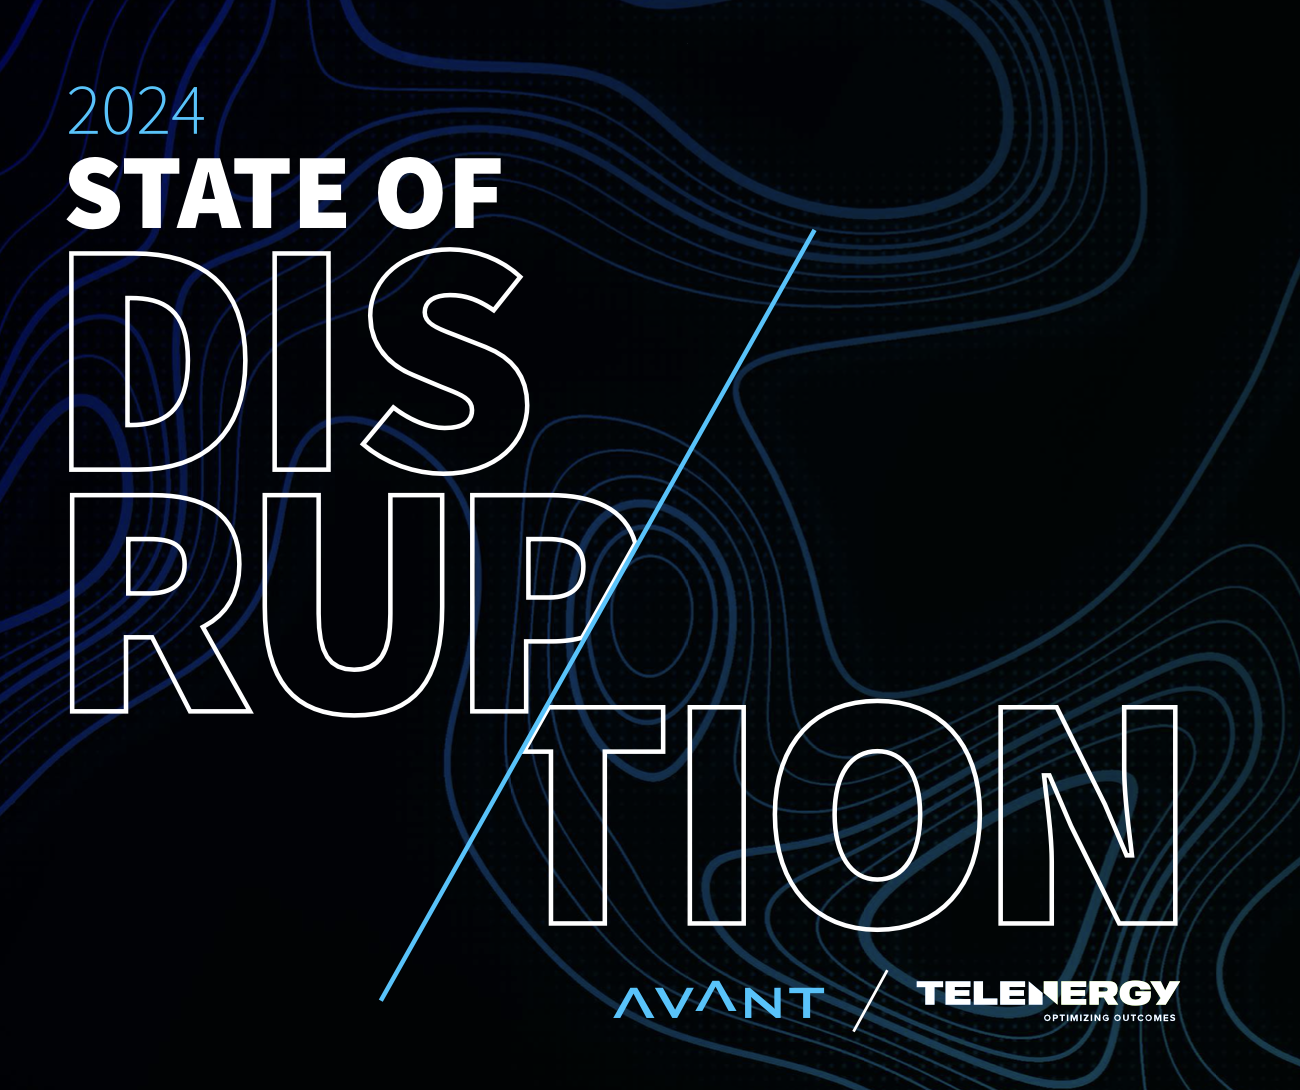 AVANT State of Disruption Report